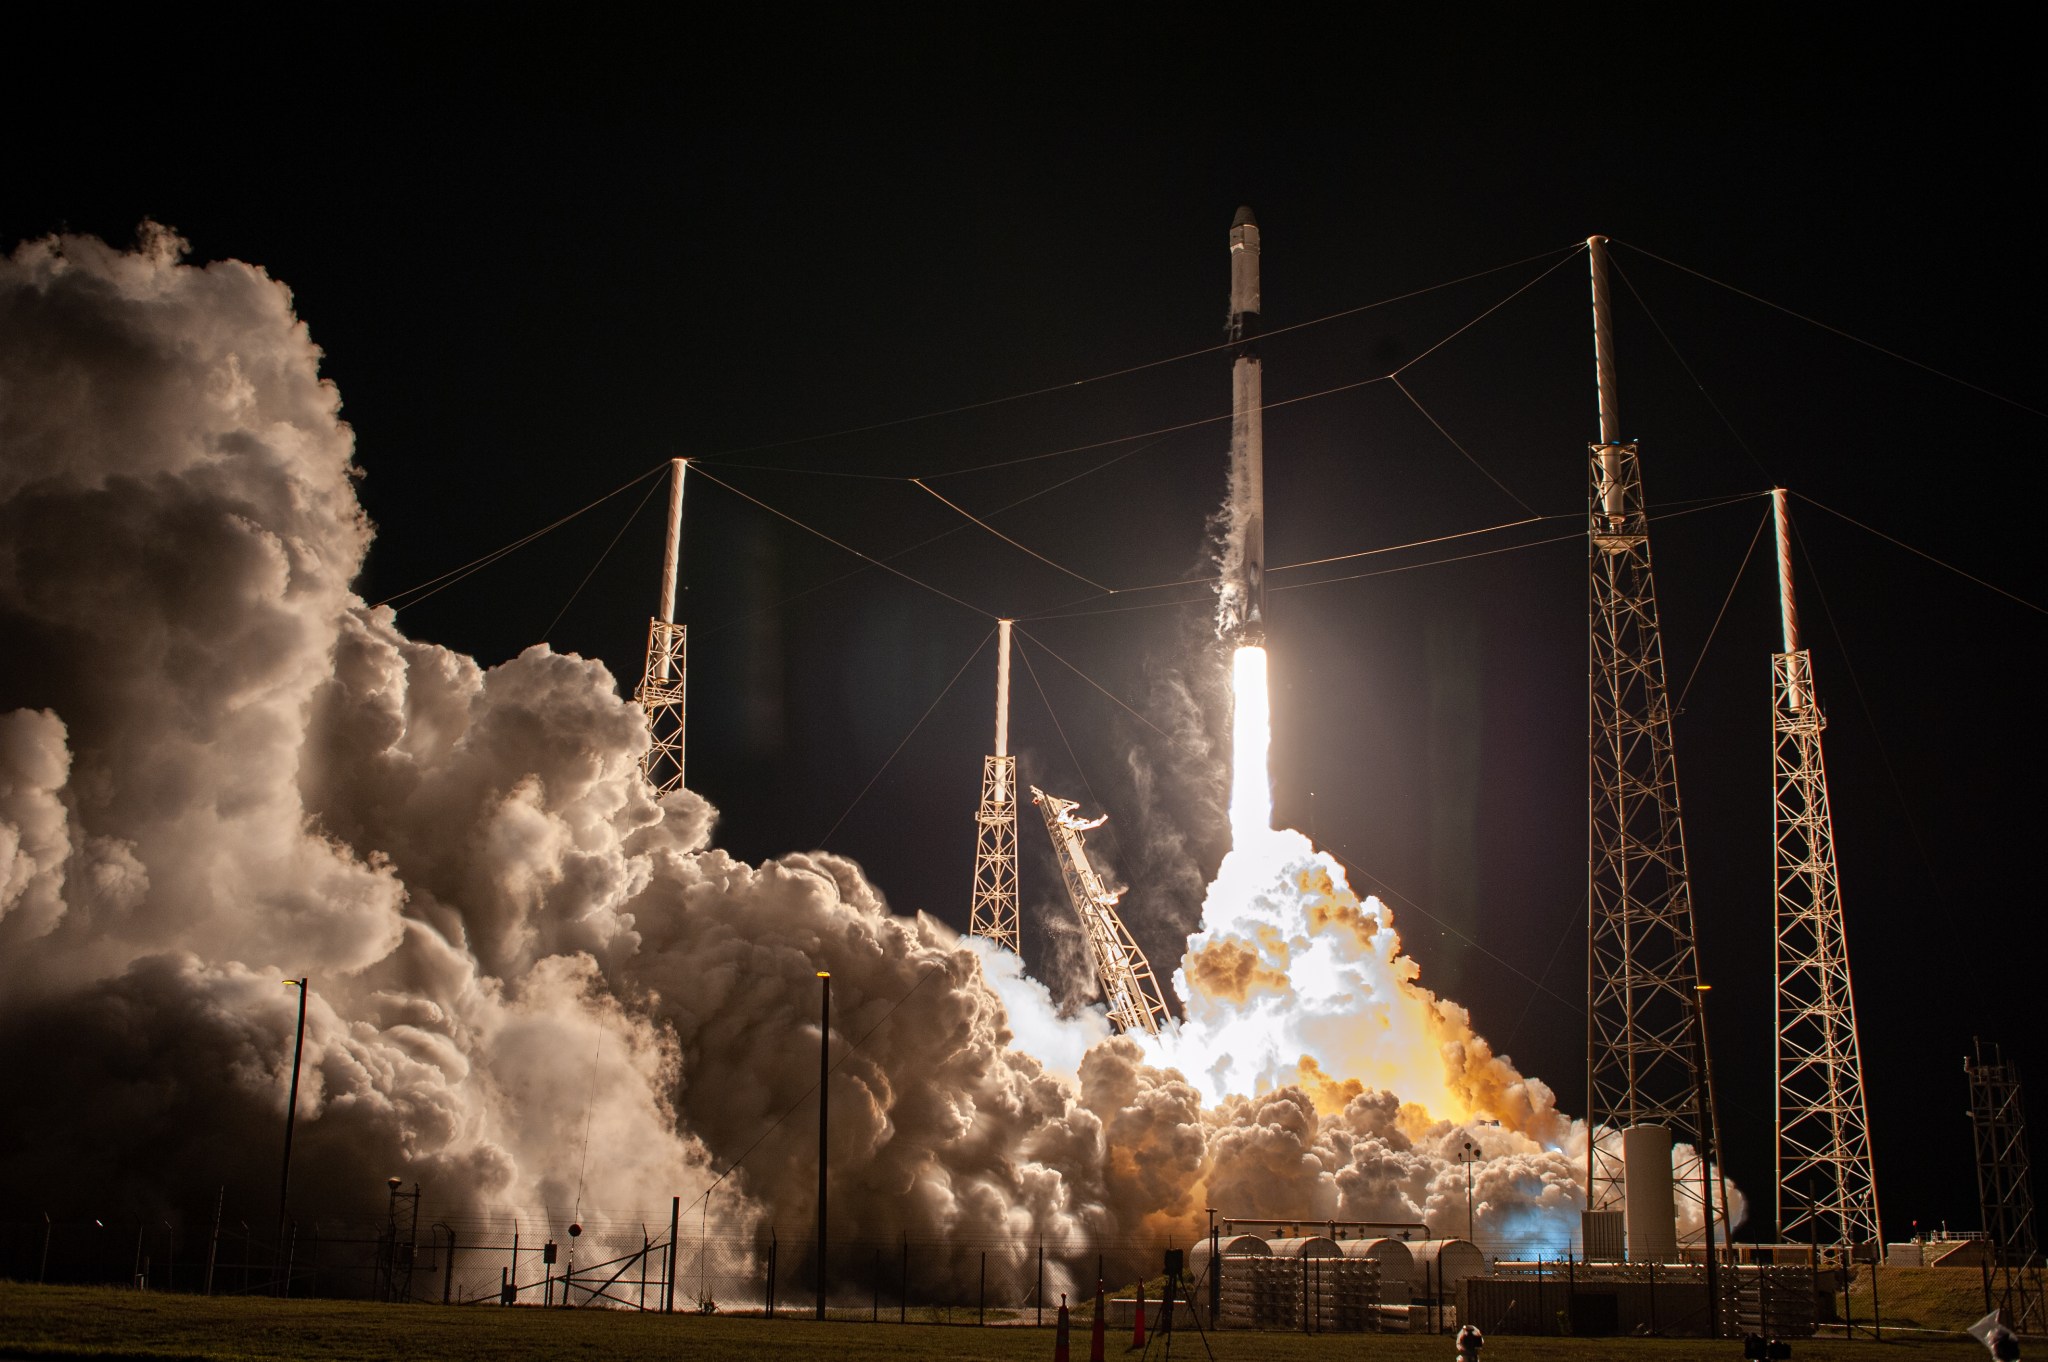 A SpaceX Falcon 9 rocket lifts off from Space Launch Complex 40 at Cape Canaveral Air Force Station in Florida